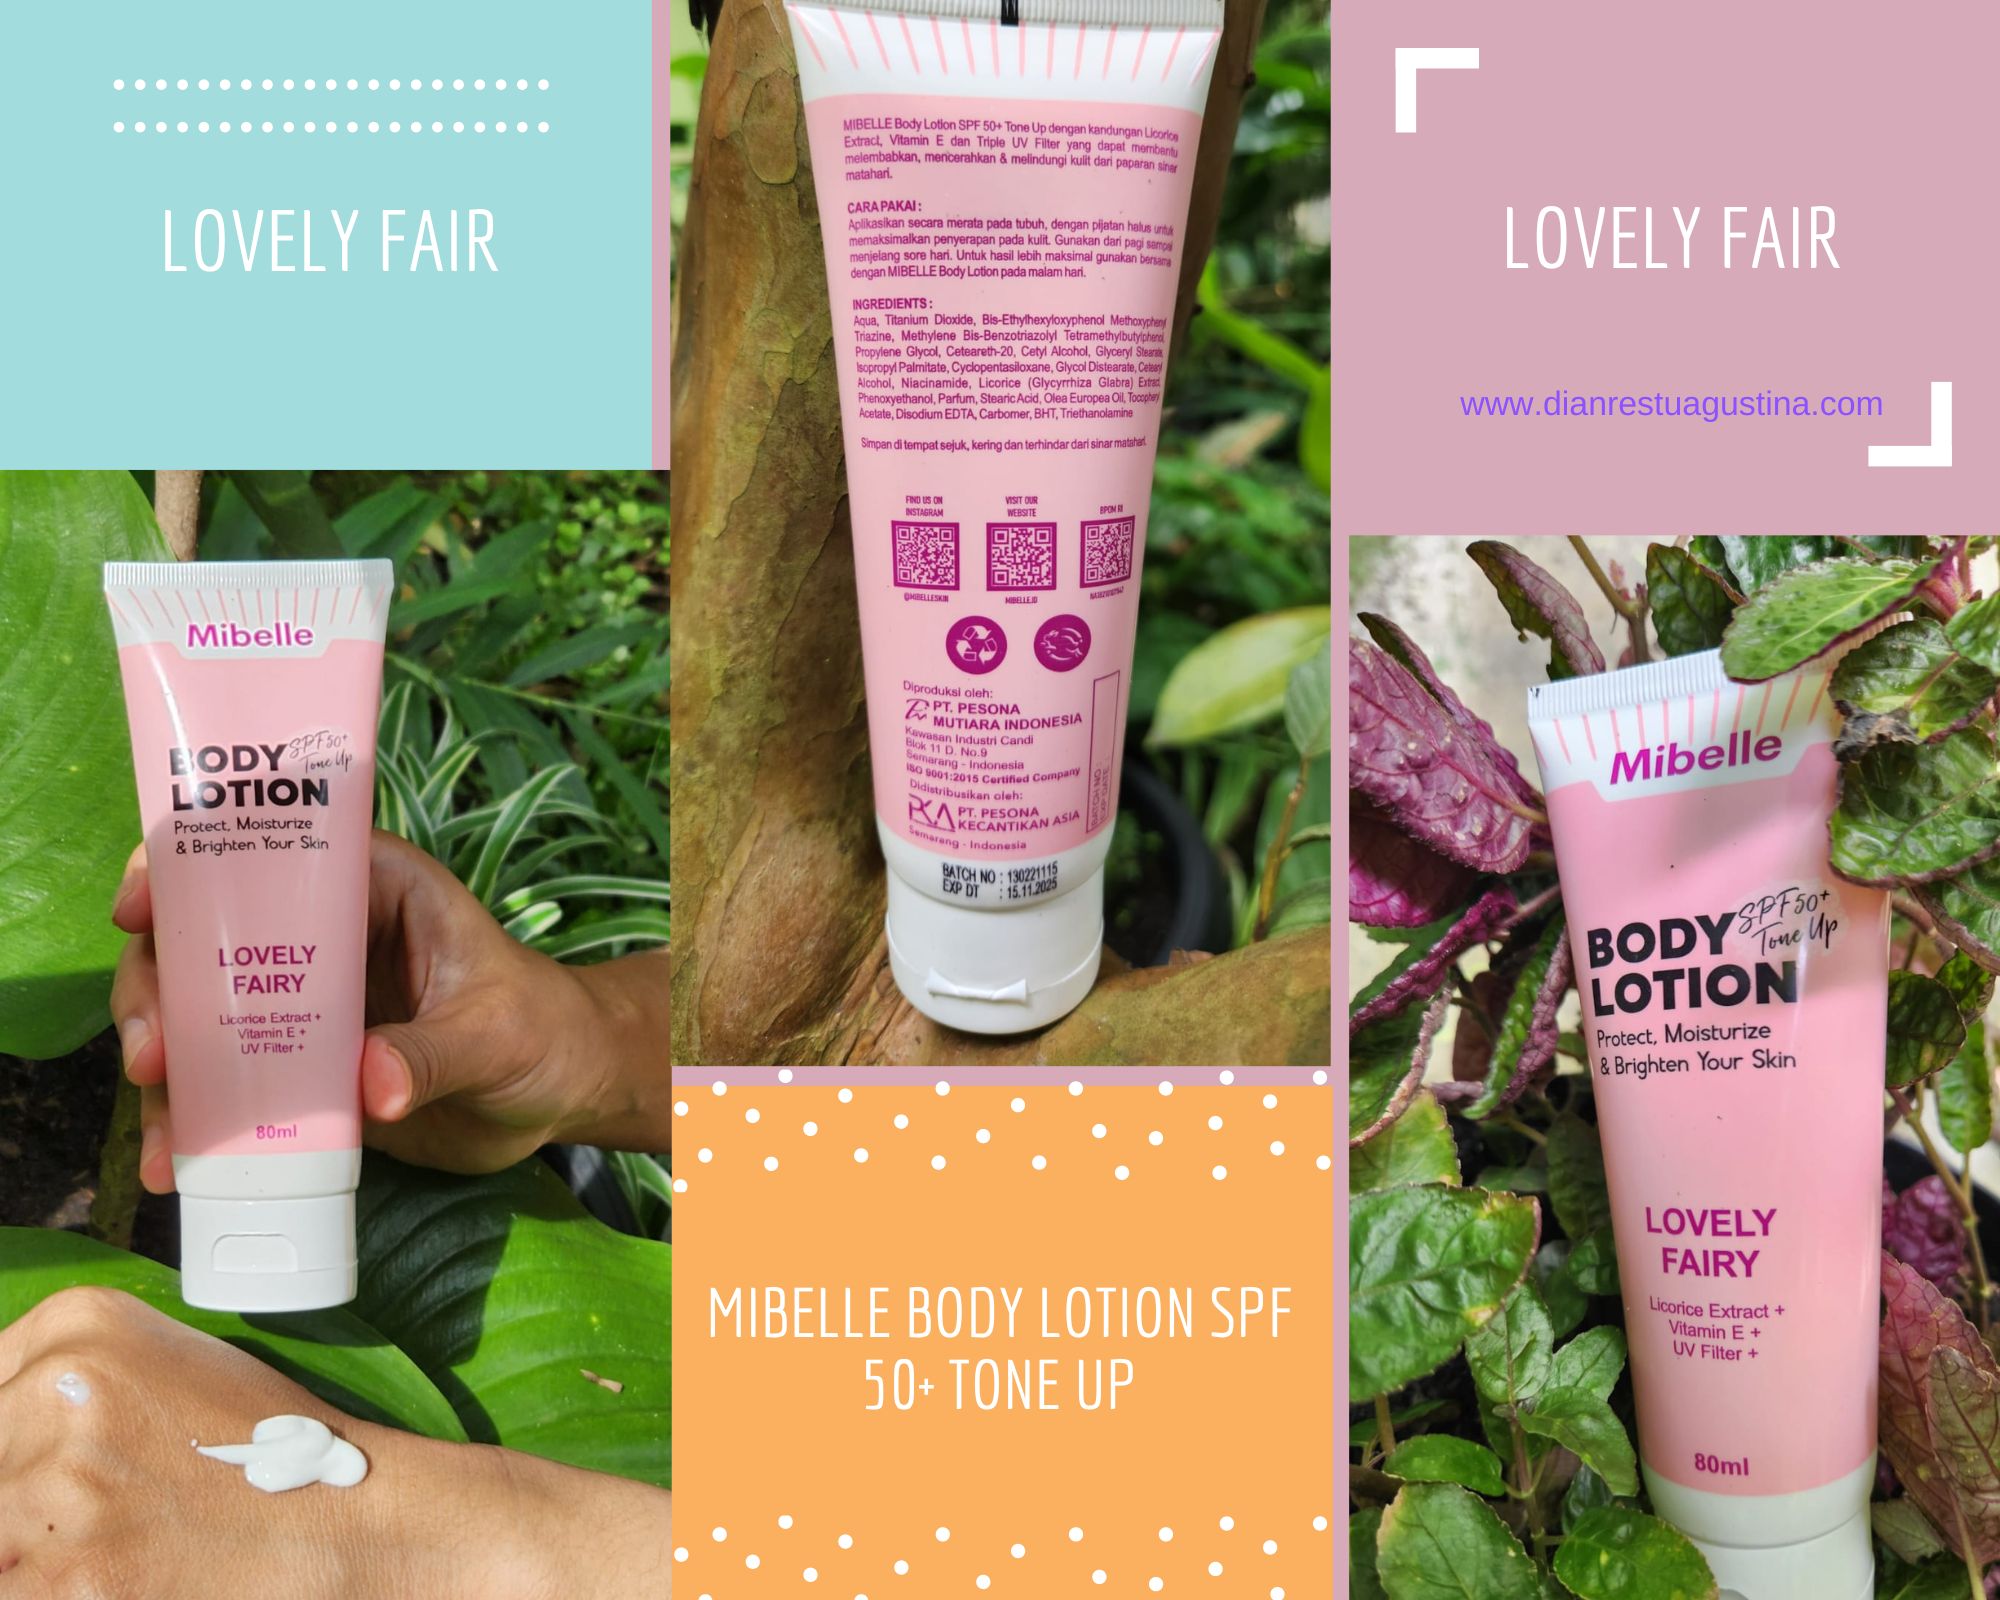 Mibelle Body Lotion SPF 50+ Tone Up